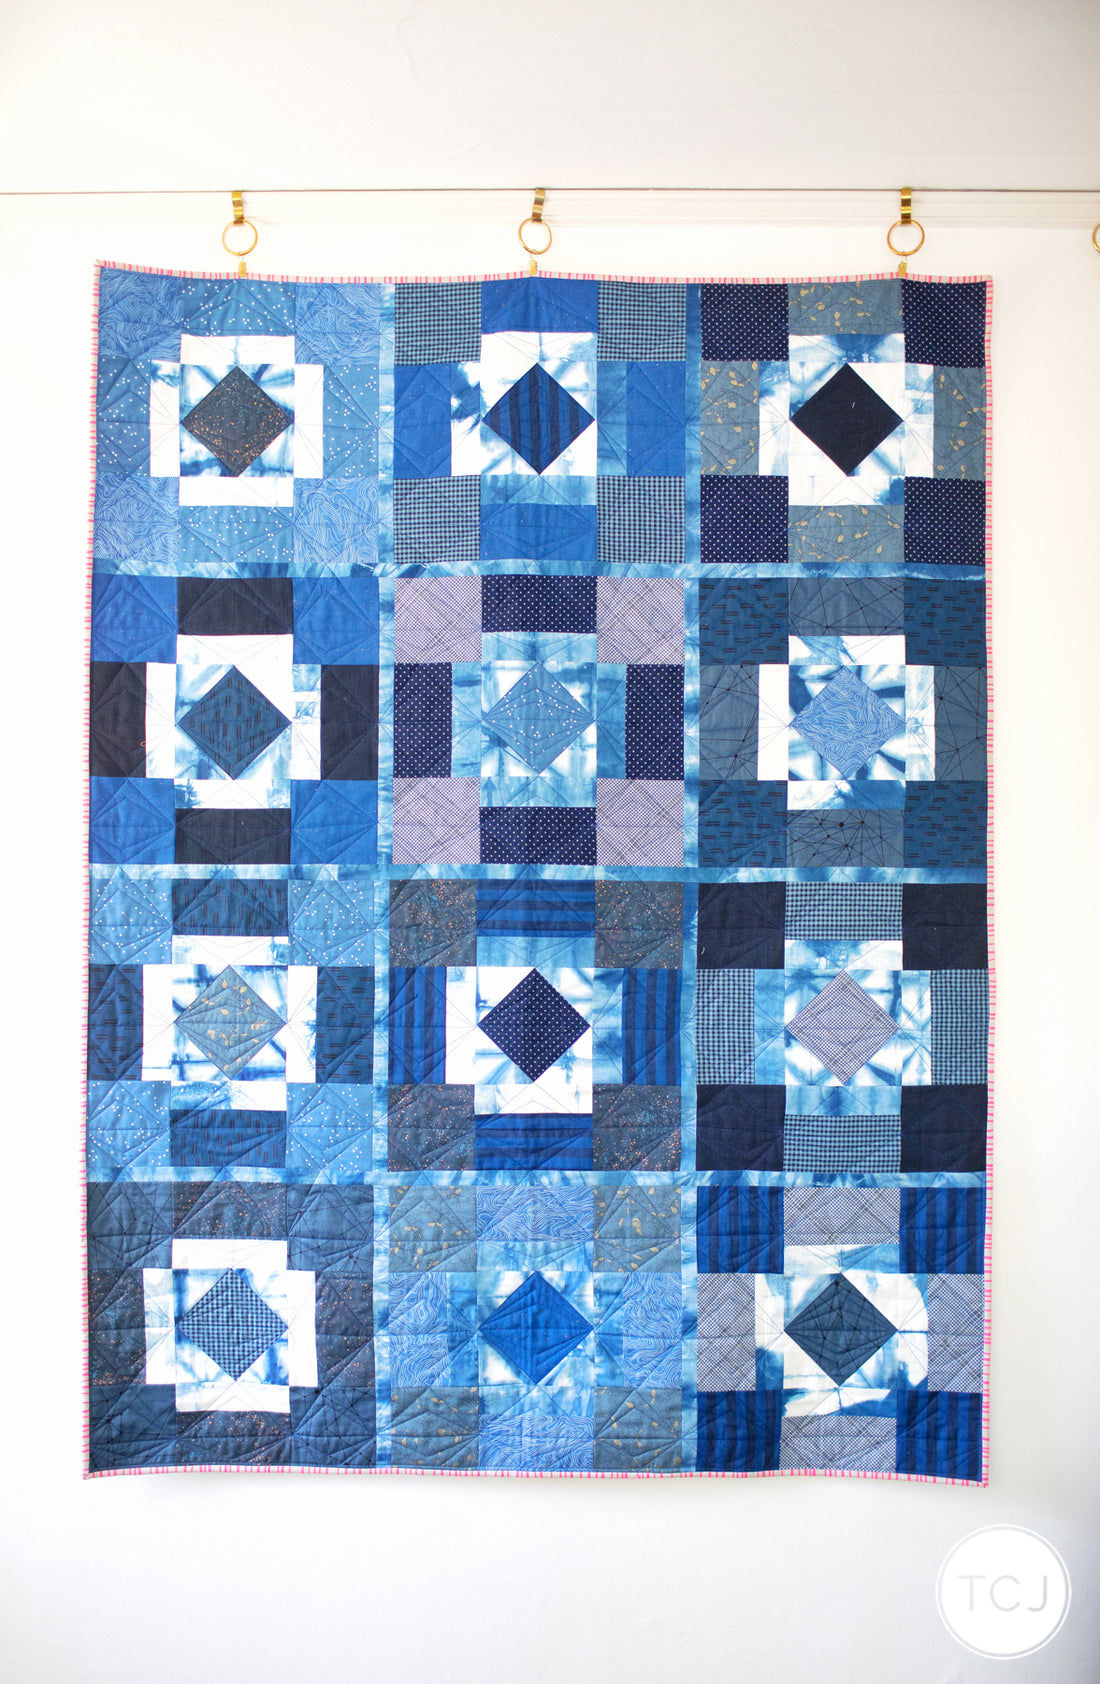 Backyard Party Quilt - the Indigo One